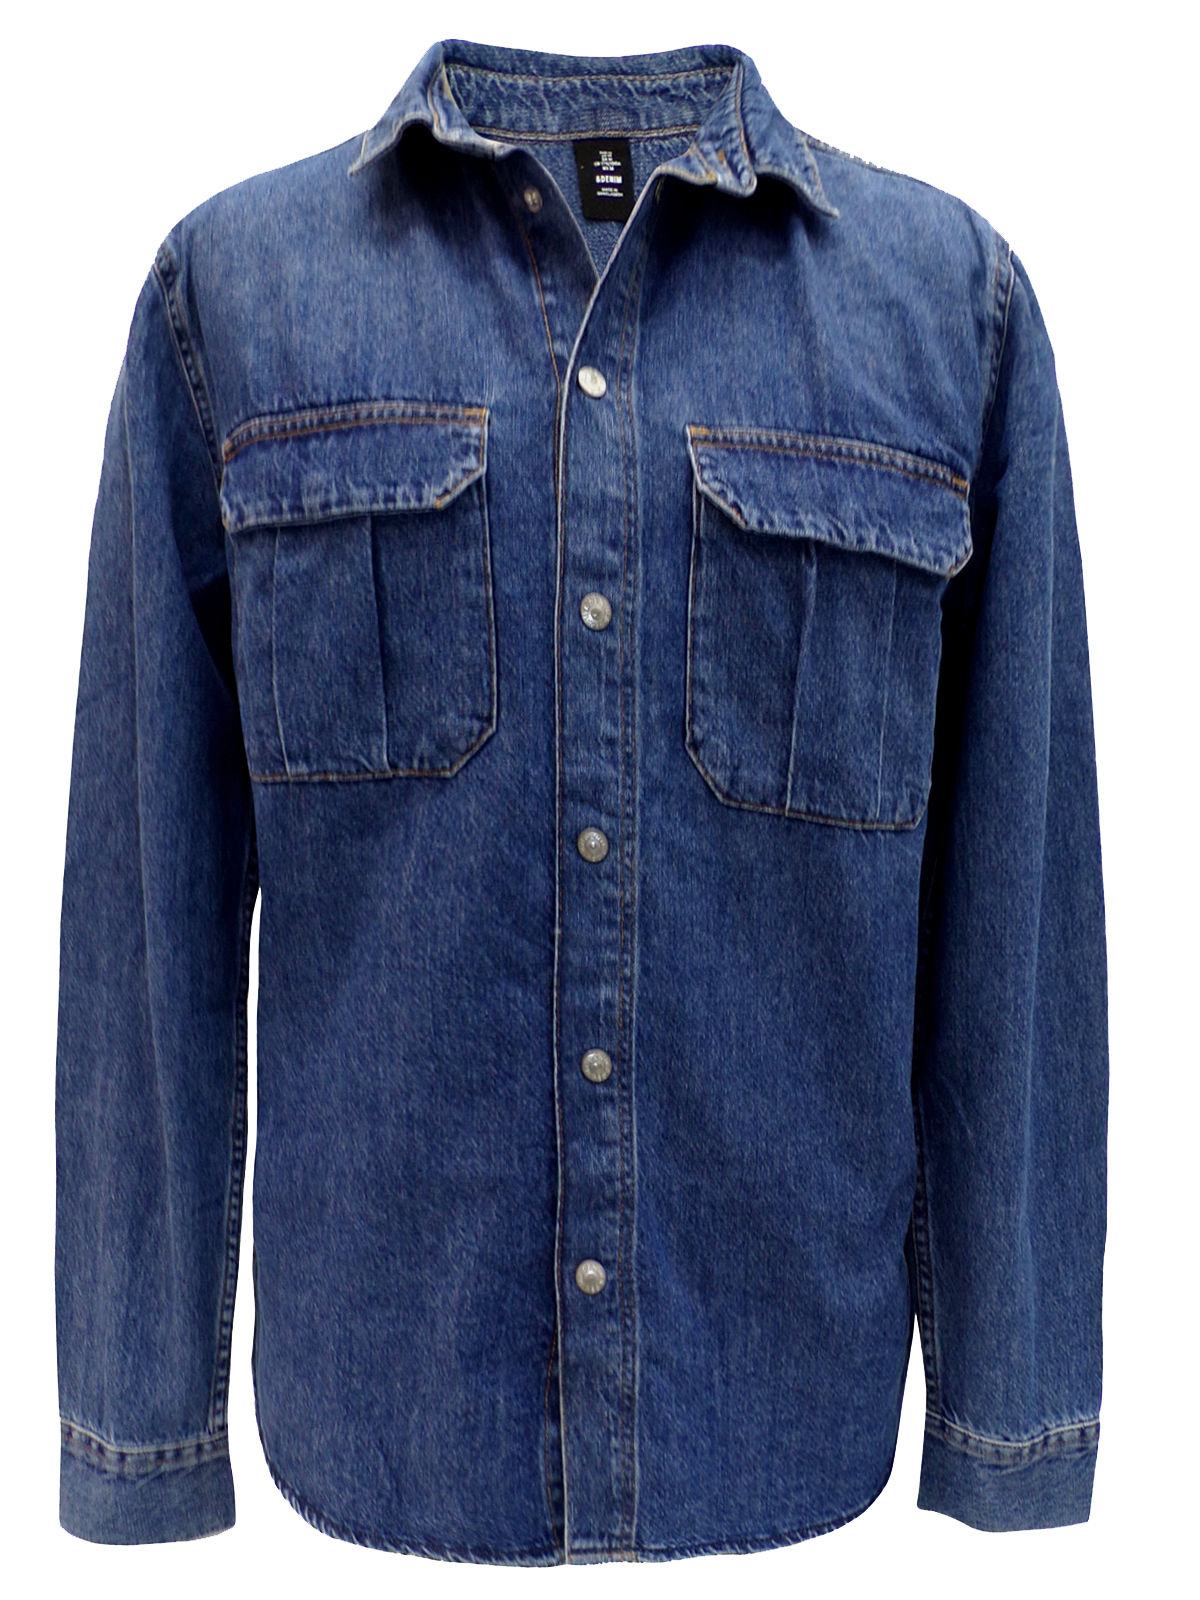 H&M DENIM Pure Cotton Denim Shirt with Pockets - Size XSmall to XLarge